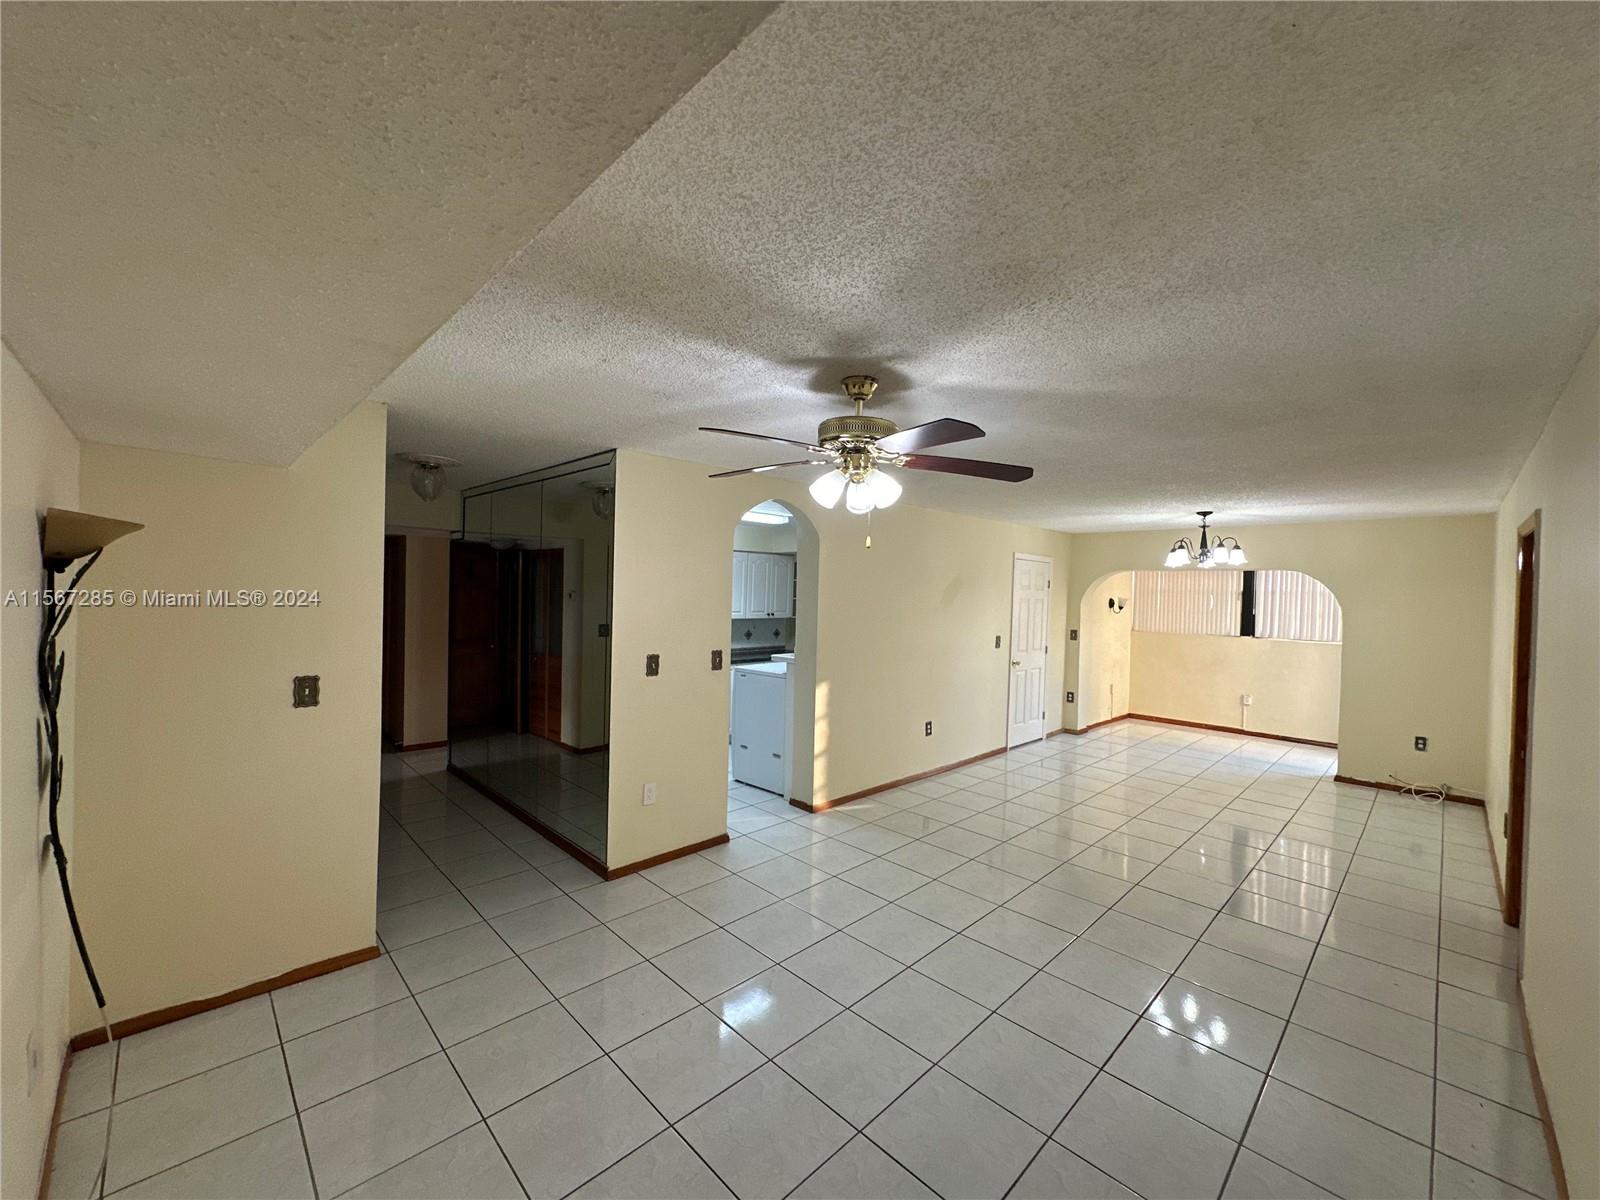 1300 SW 122nd Ave 109-2, Miami, Florida 33184, 2 Bedrooms Bedrooms, ,2 BathroomsBathrooms,Residential,For Sale,1300 SW 122nd Ave 109-2,A11567285